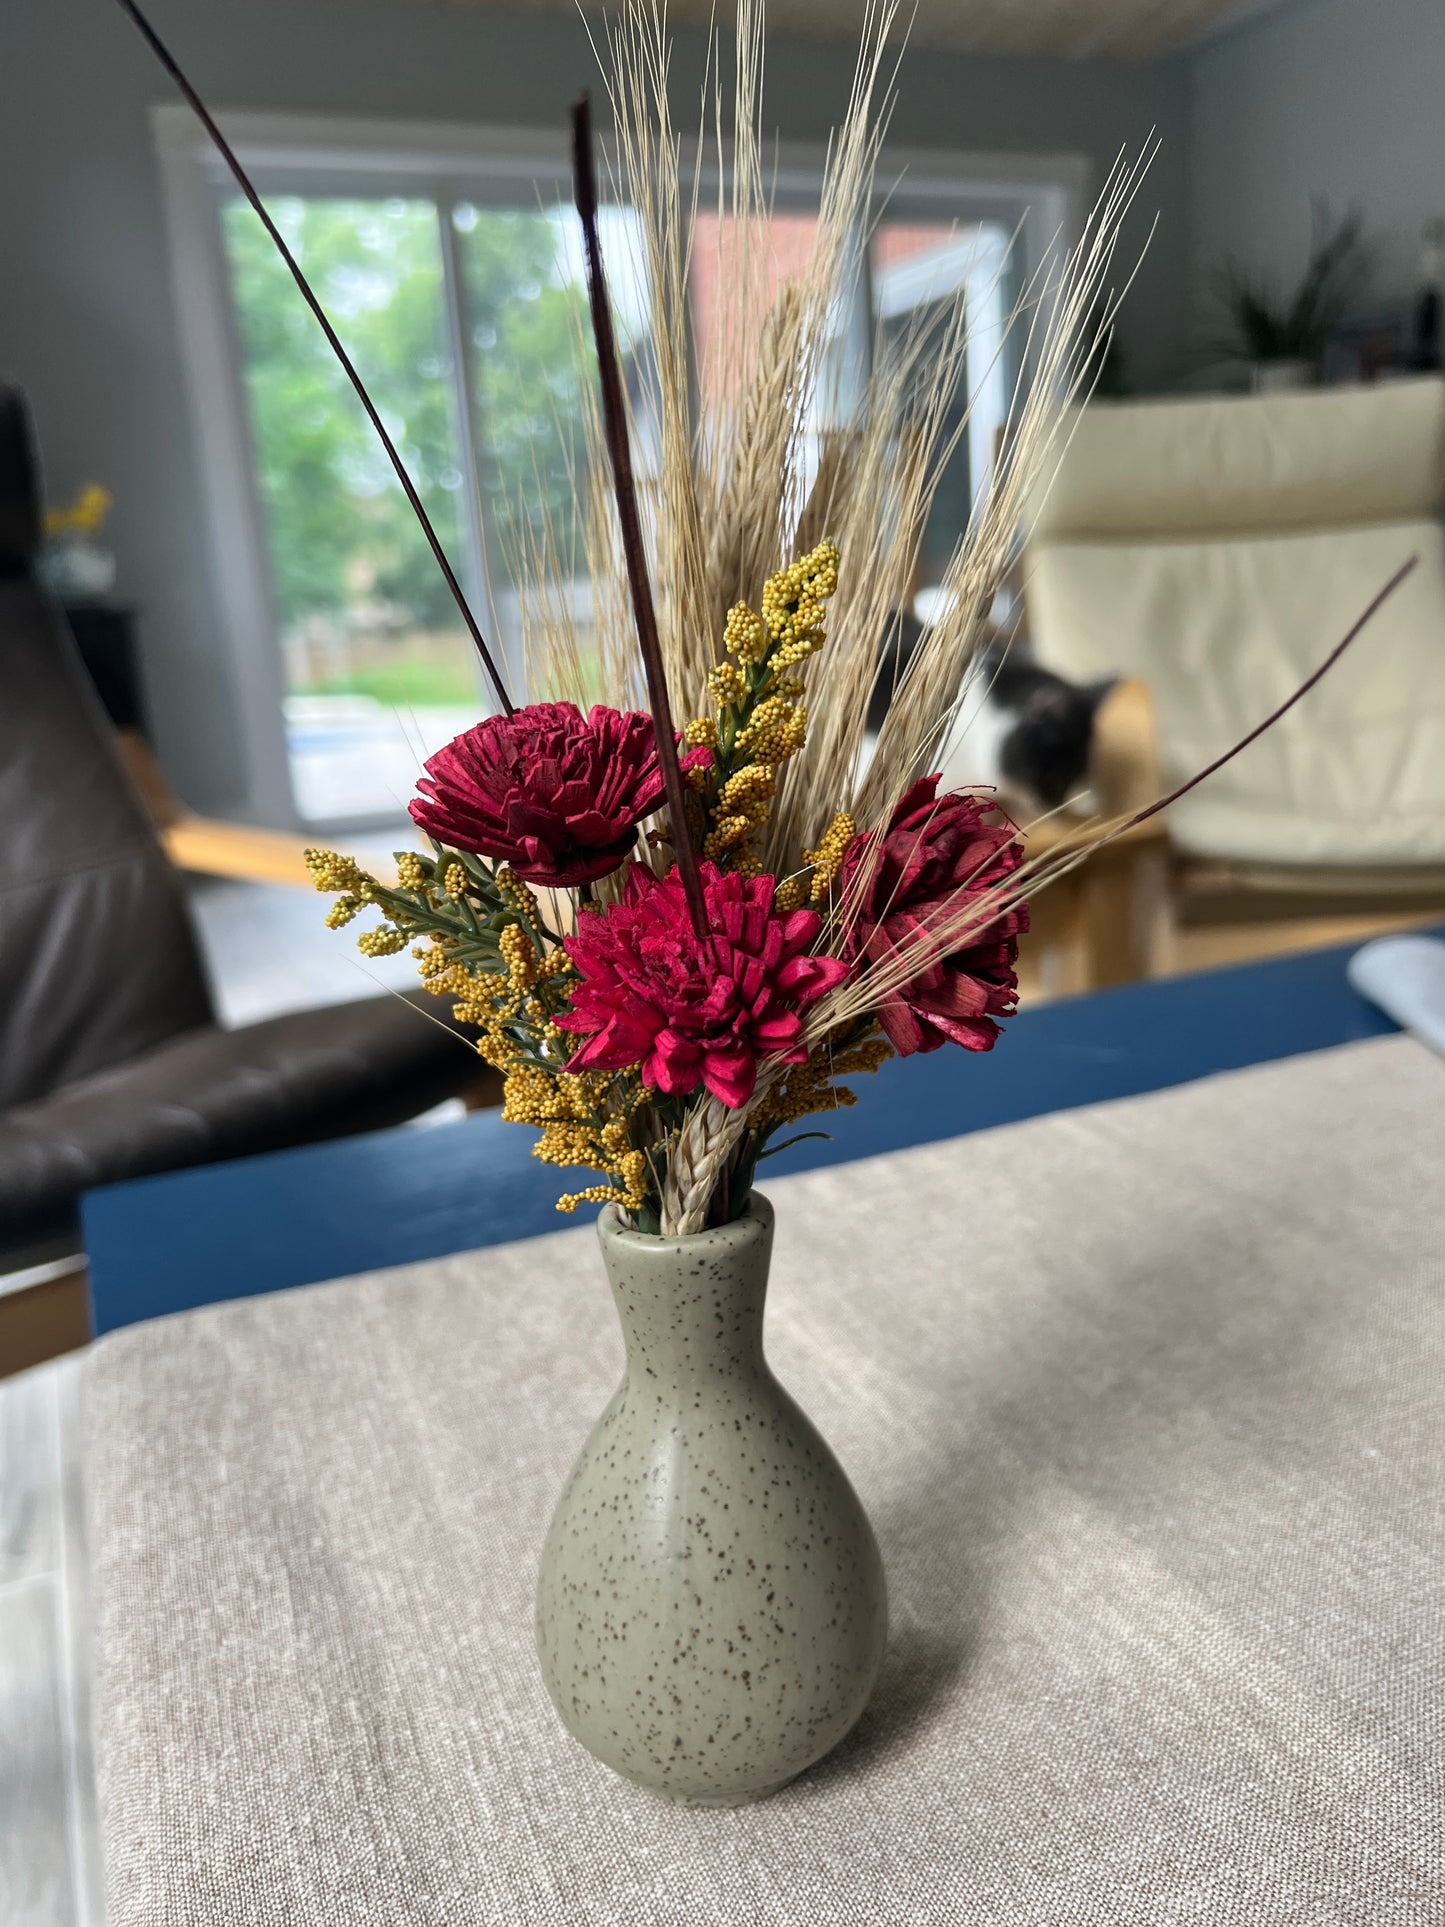 Autumn Embrace: Sola Wood Flower Small Vase with Red Blooms and Wheat Accents